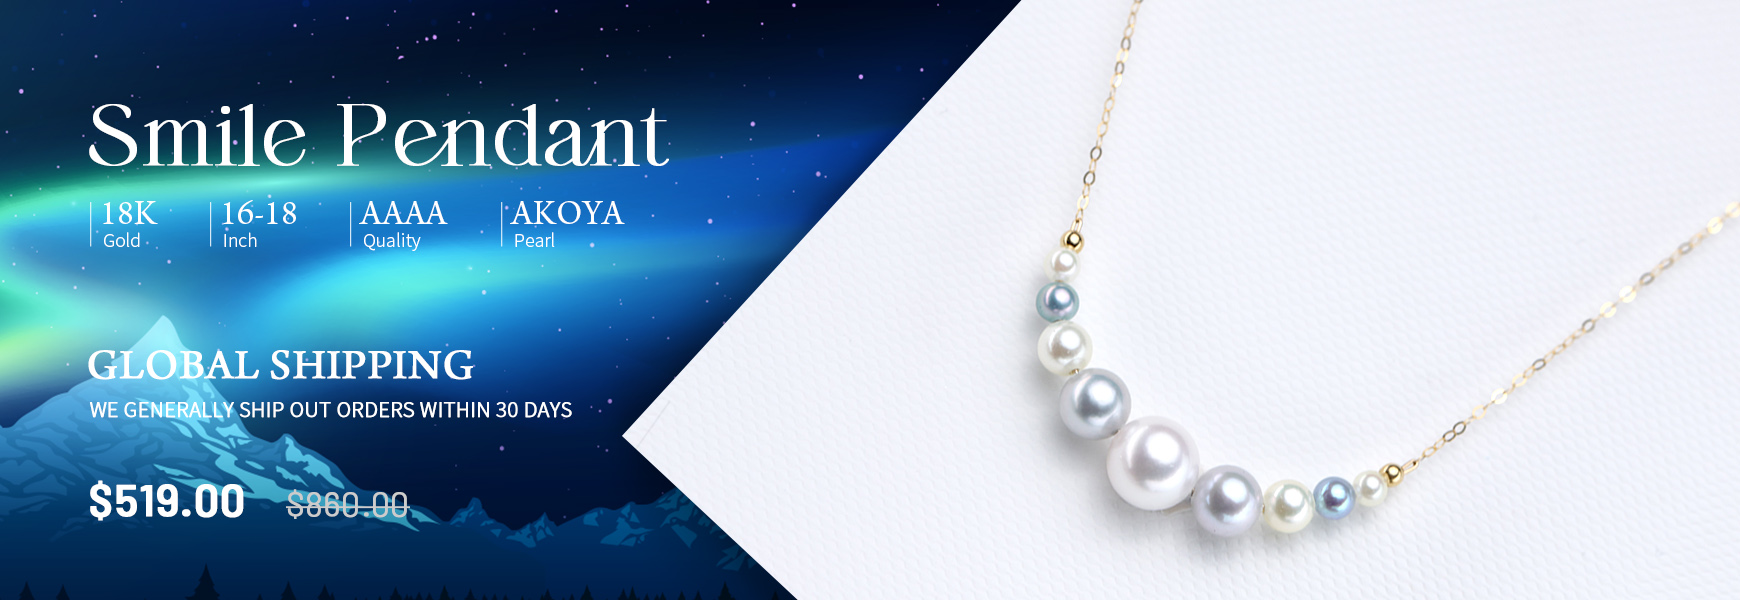 2.5-8.0mm Akoya Pearl Smile Pendant in 18K Gold - AAAA Quality